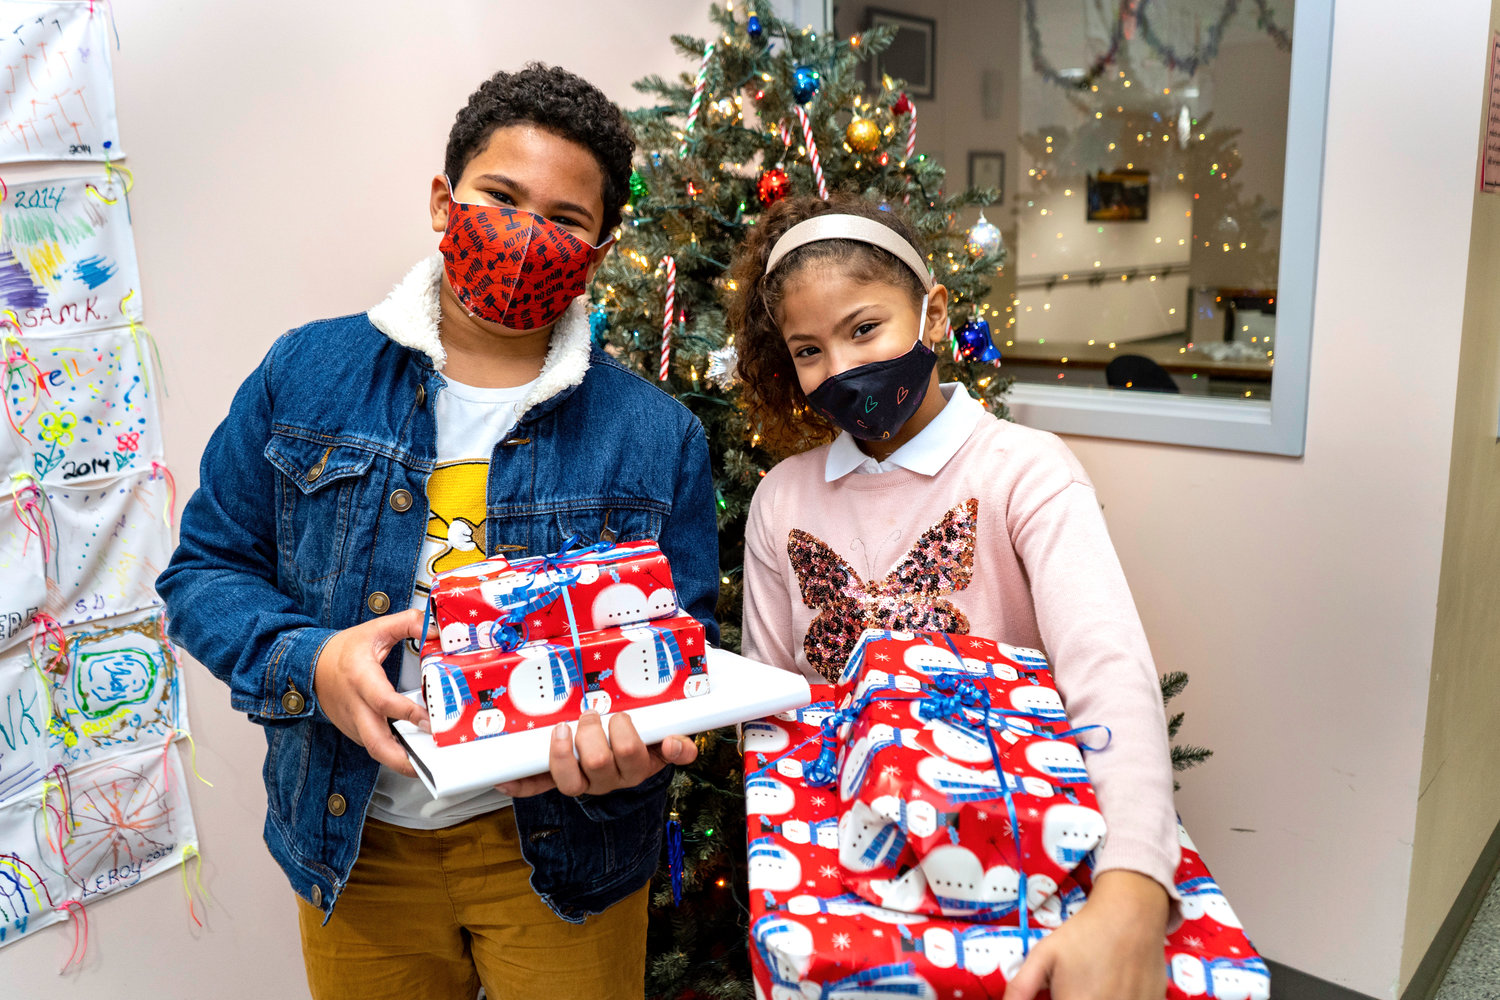 HAPPY SURPRISE — Jackob and Rebeca Benitez-Sanquiche can hardly contain the excitement in anticipation of opening presents from their special secret Santas.